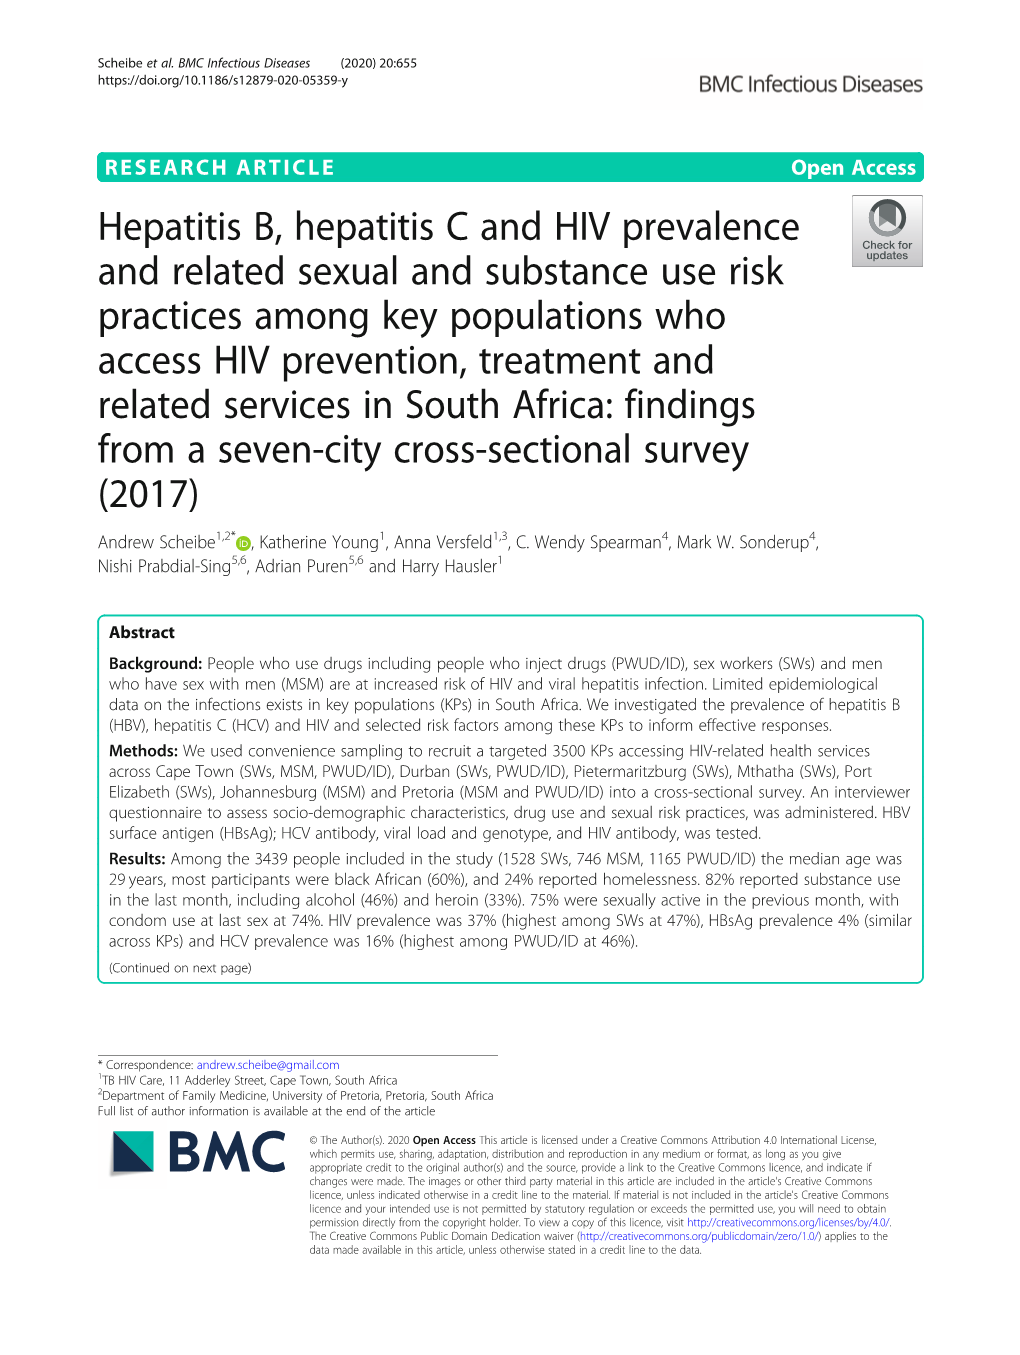 Hepatitis B, Hepatitis C and HIV Prevalence and Related Sexual and Substance Use Risk Practices Among Key Populations Who Access